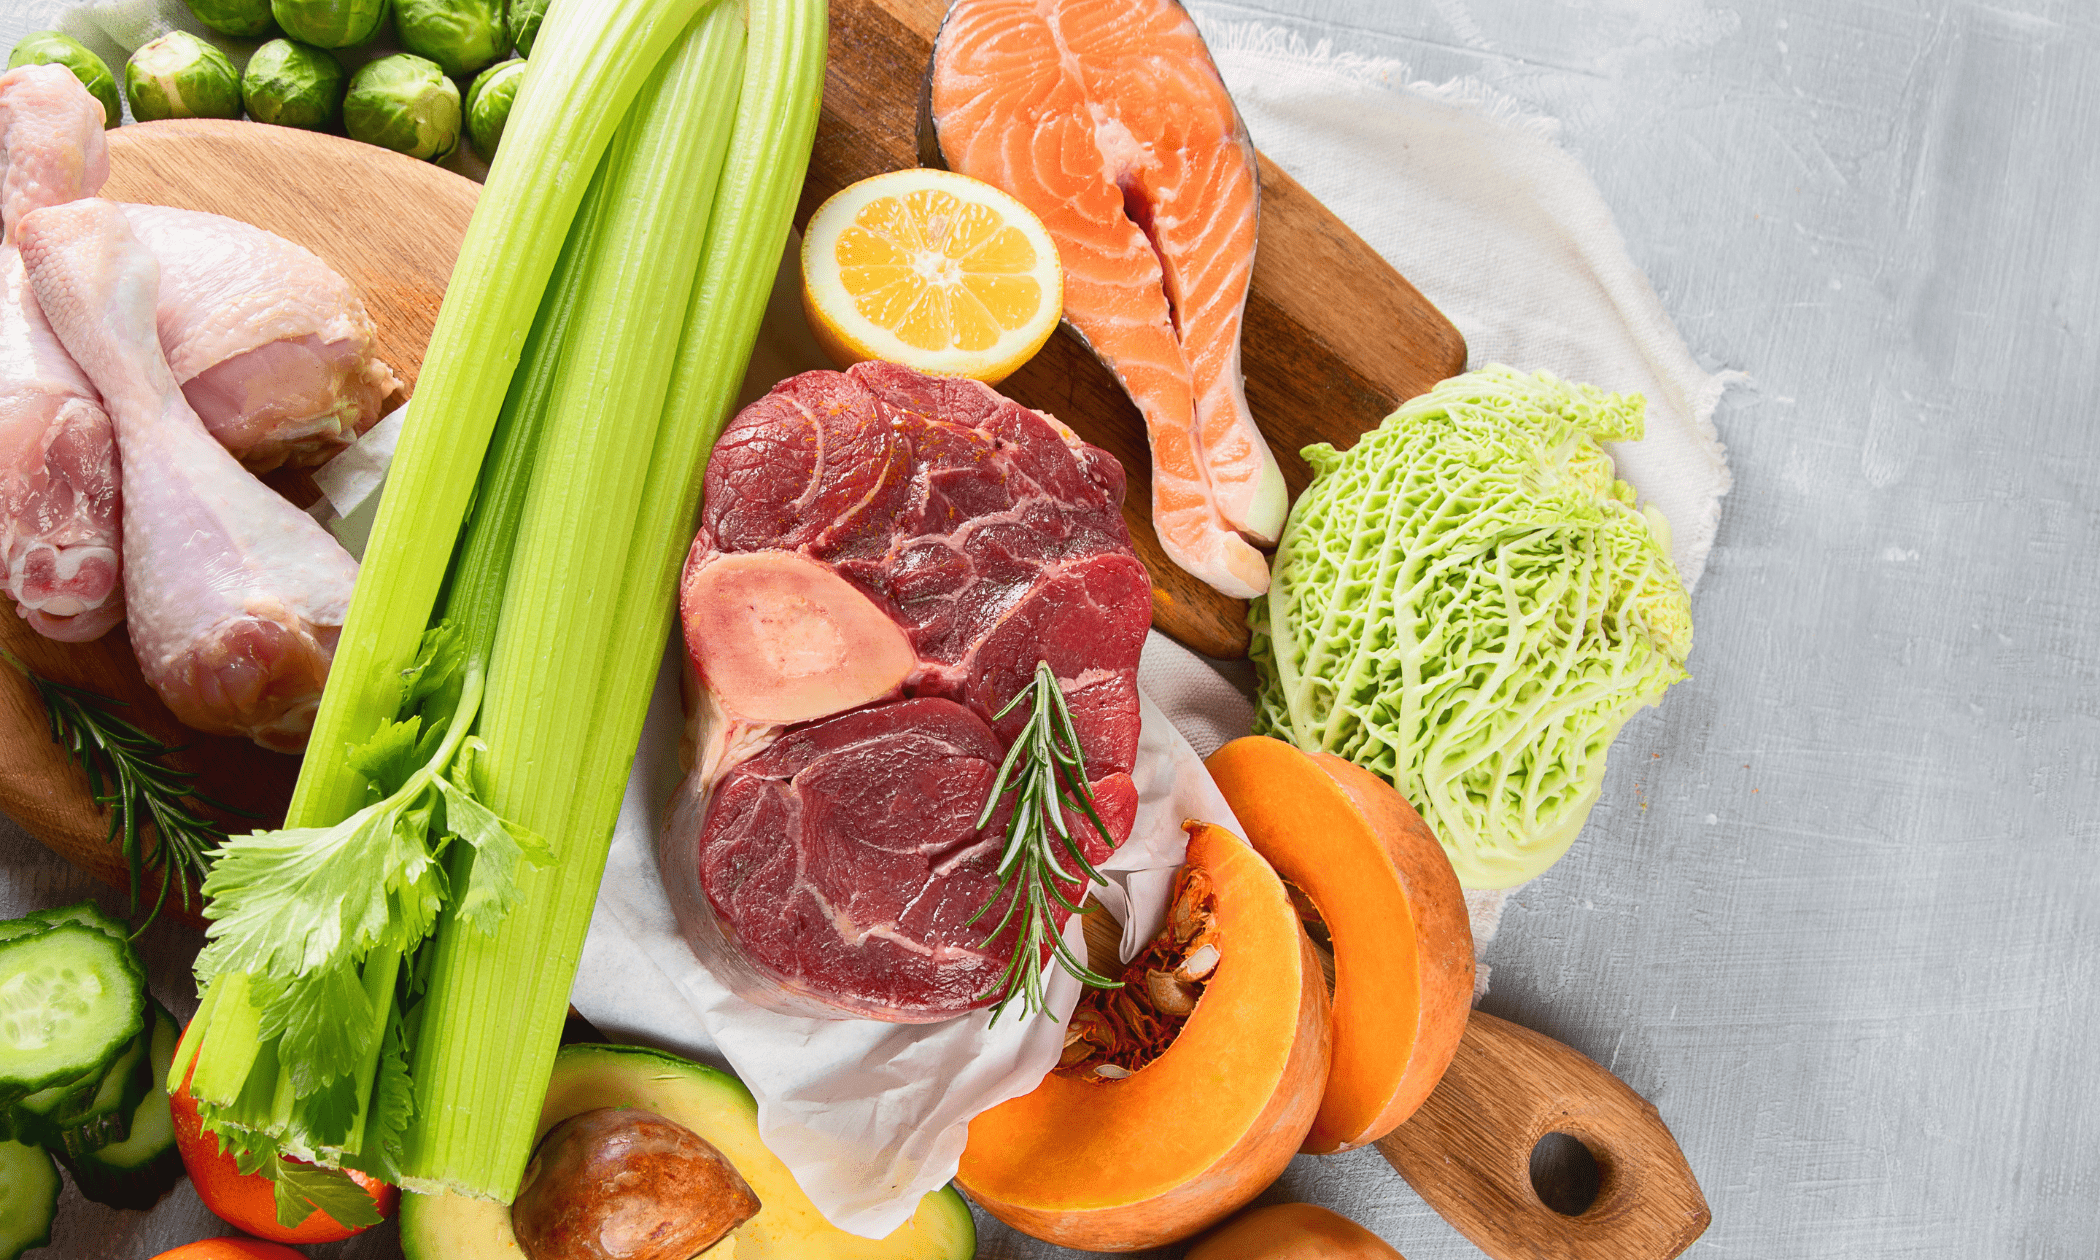 How to Lose Fat with the Primal or Paleo Diet